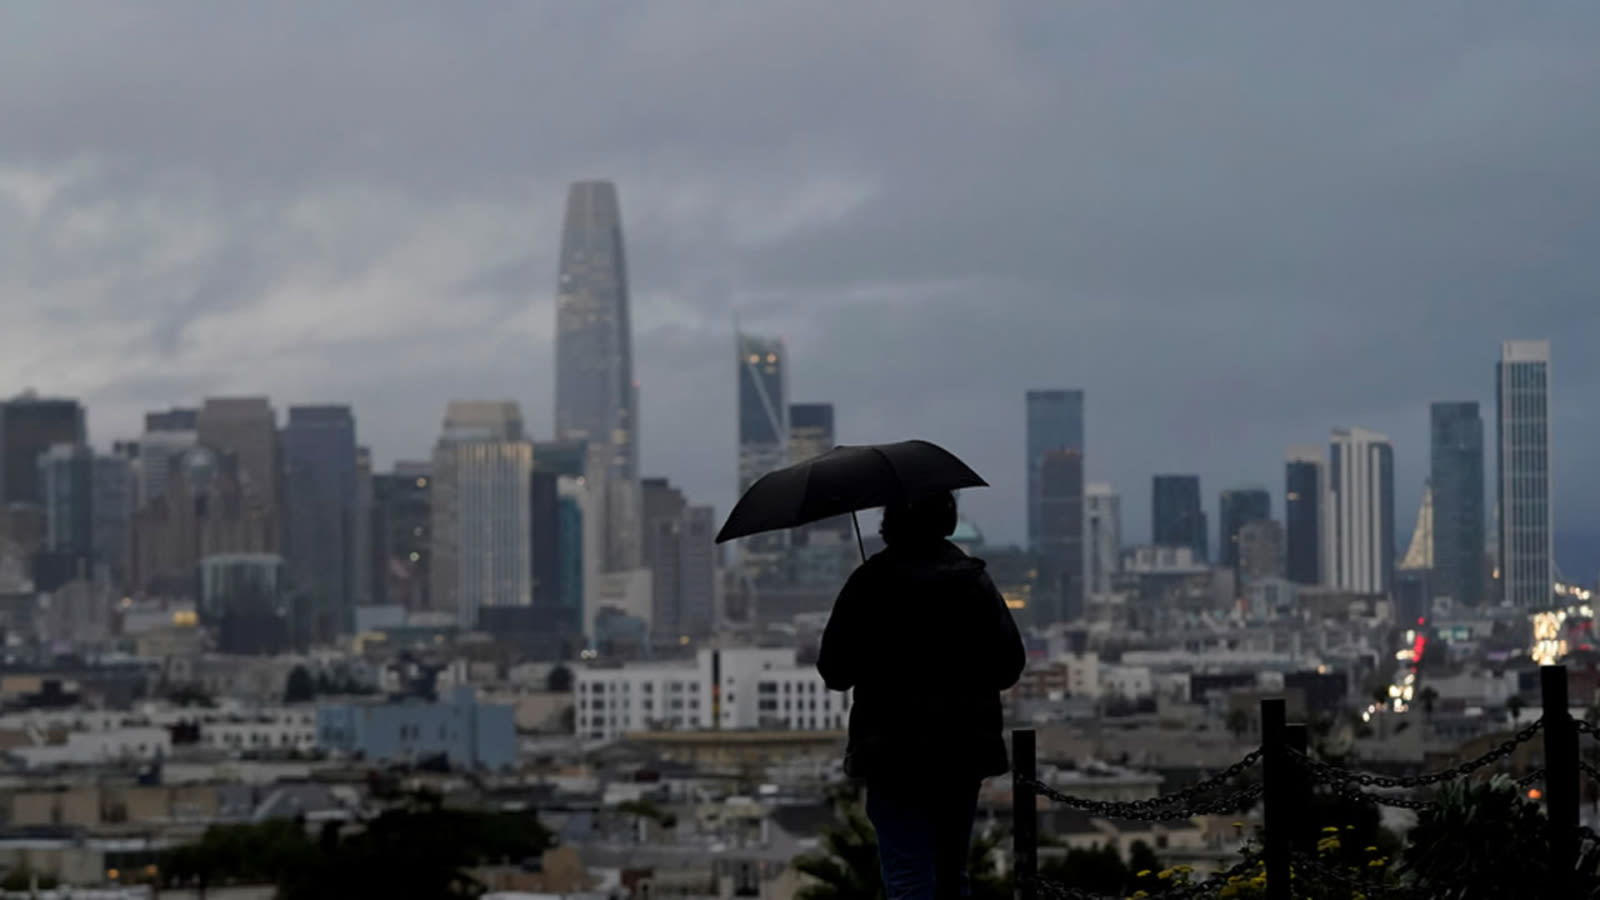 Storm to bring May rain to Bay Area Saturday. Here's a timeline